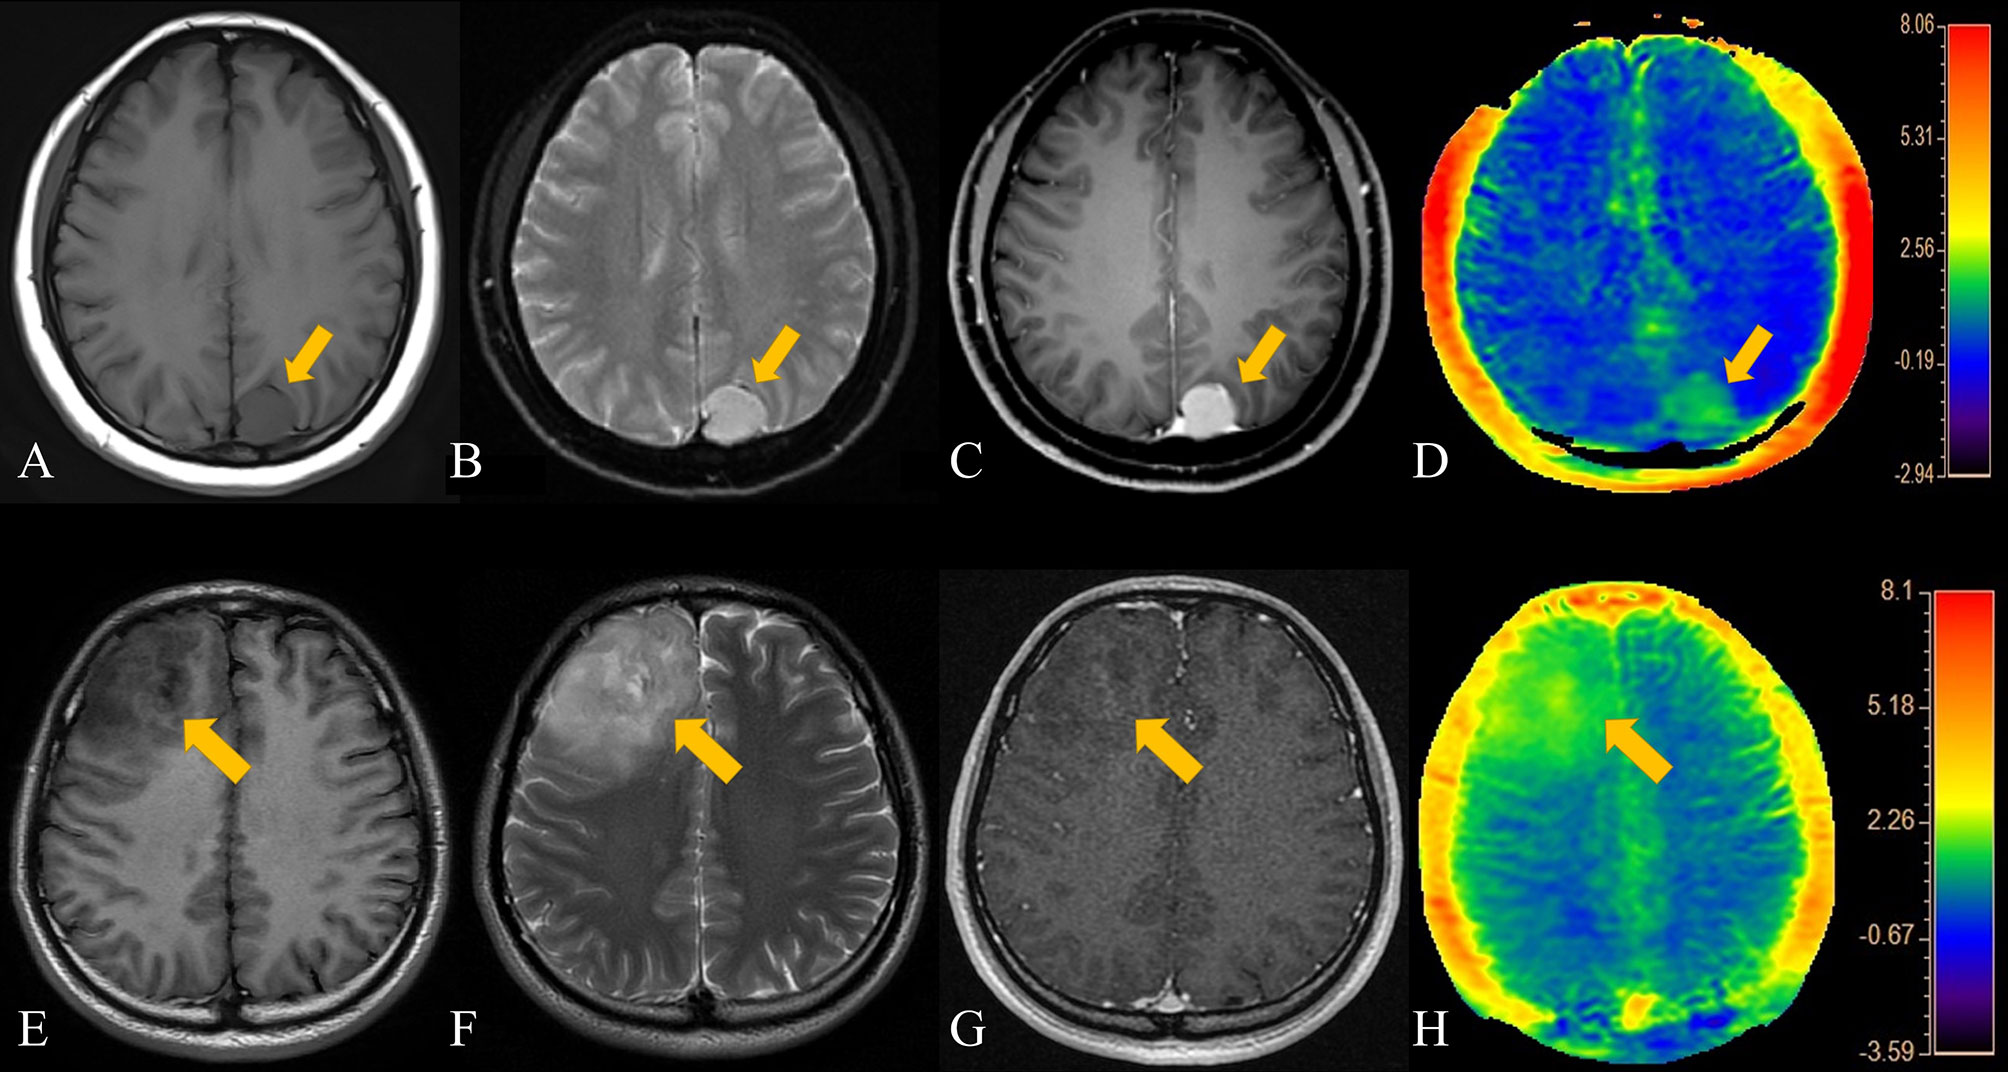 Frontiers Differentiation Of Meningiomas And Gliomas By Amide Proton Transfer Imaging A 3420